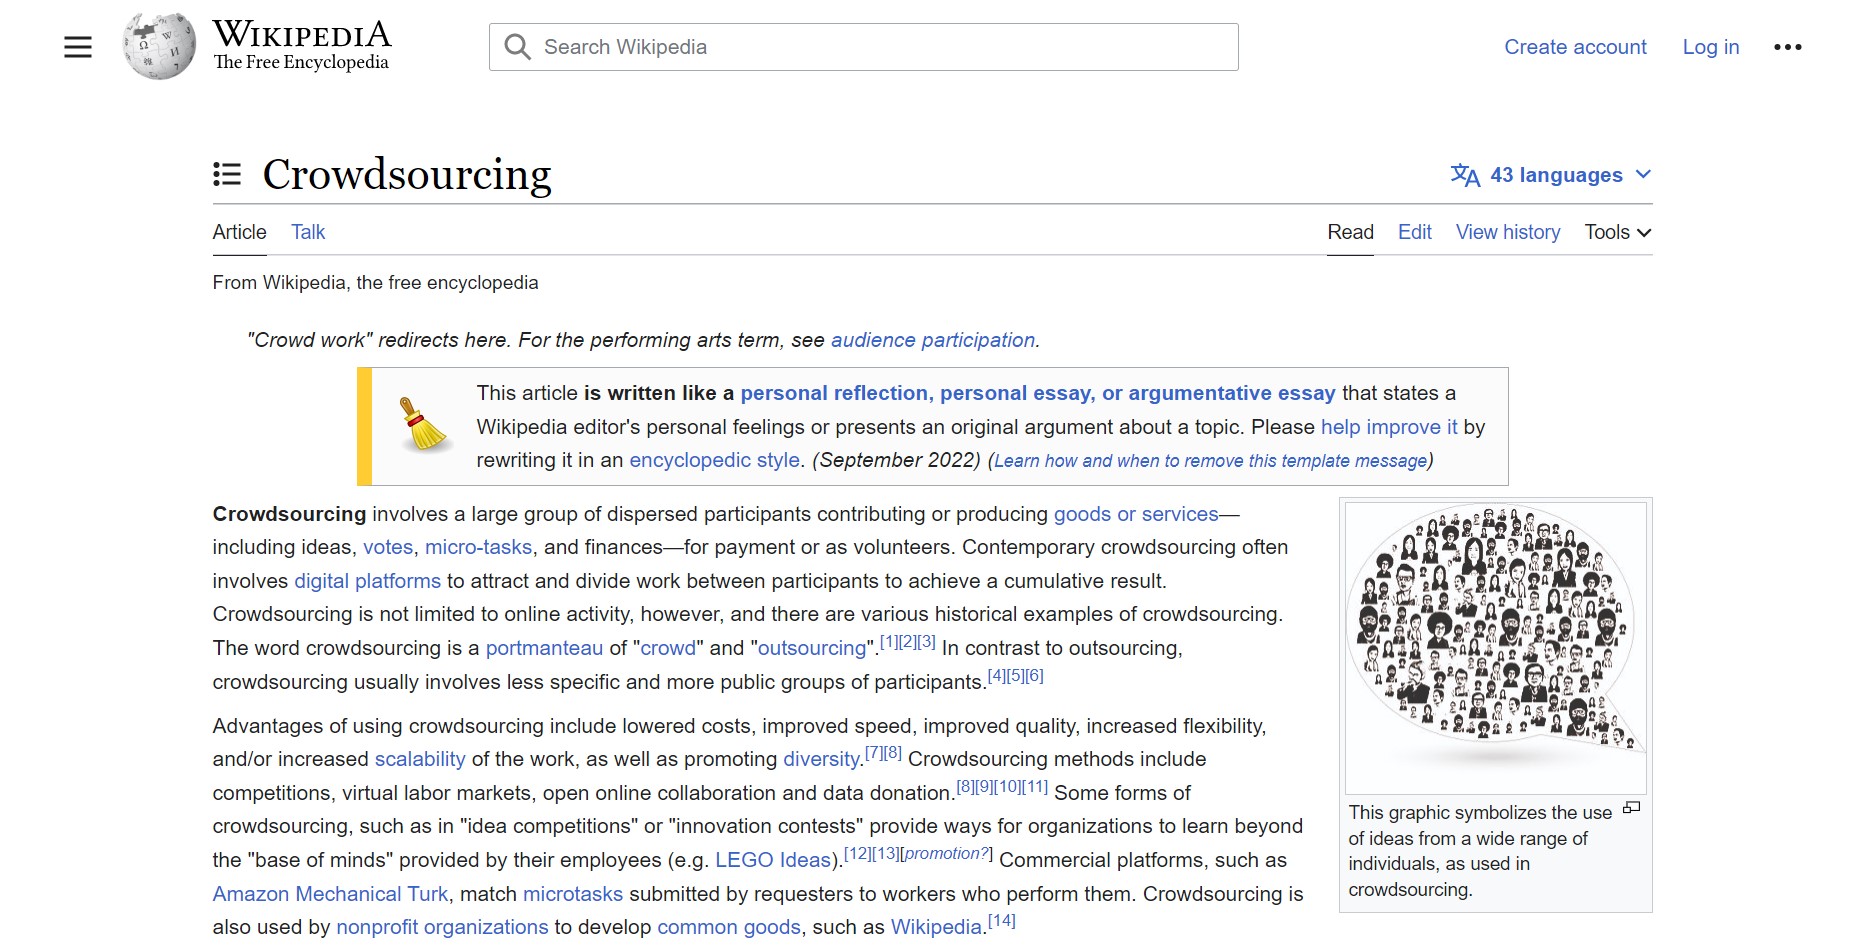 Crowdsourcing: Wikipedia sources most of its content from a vast number of contributors